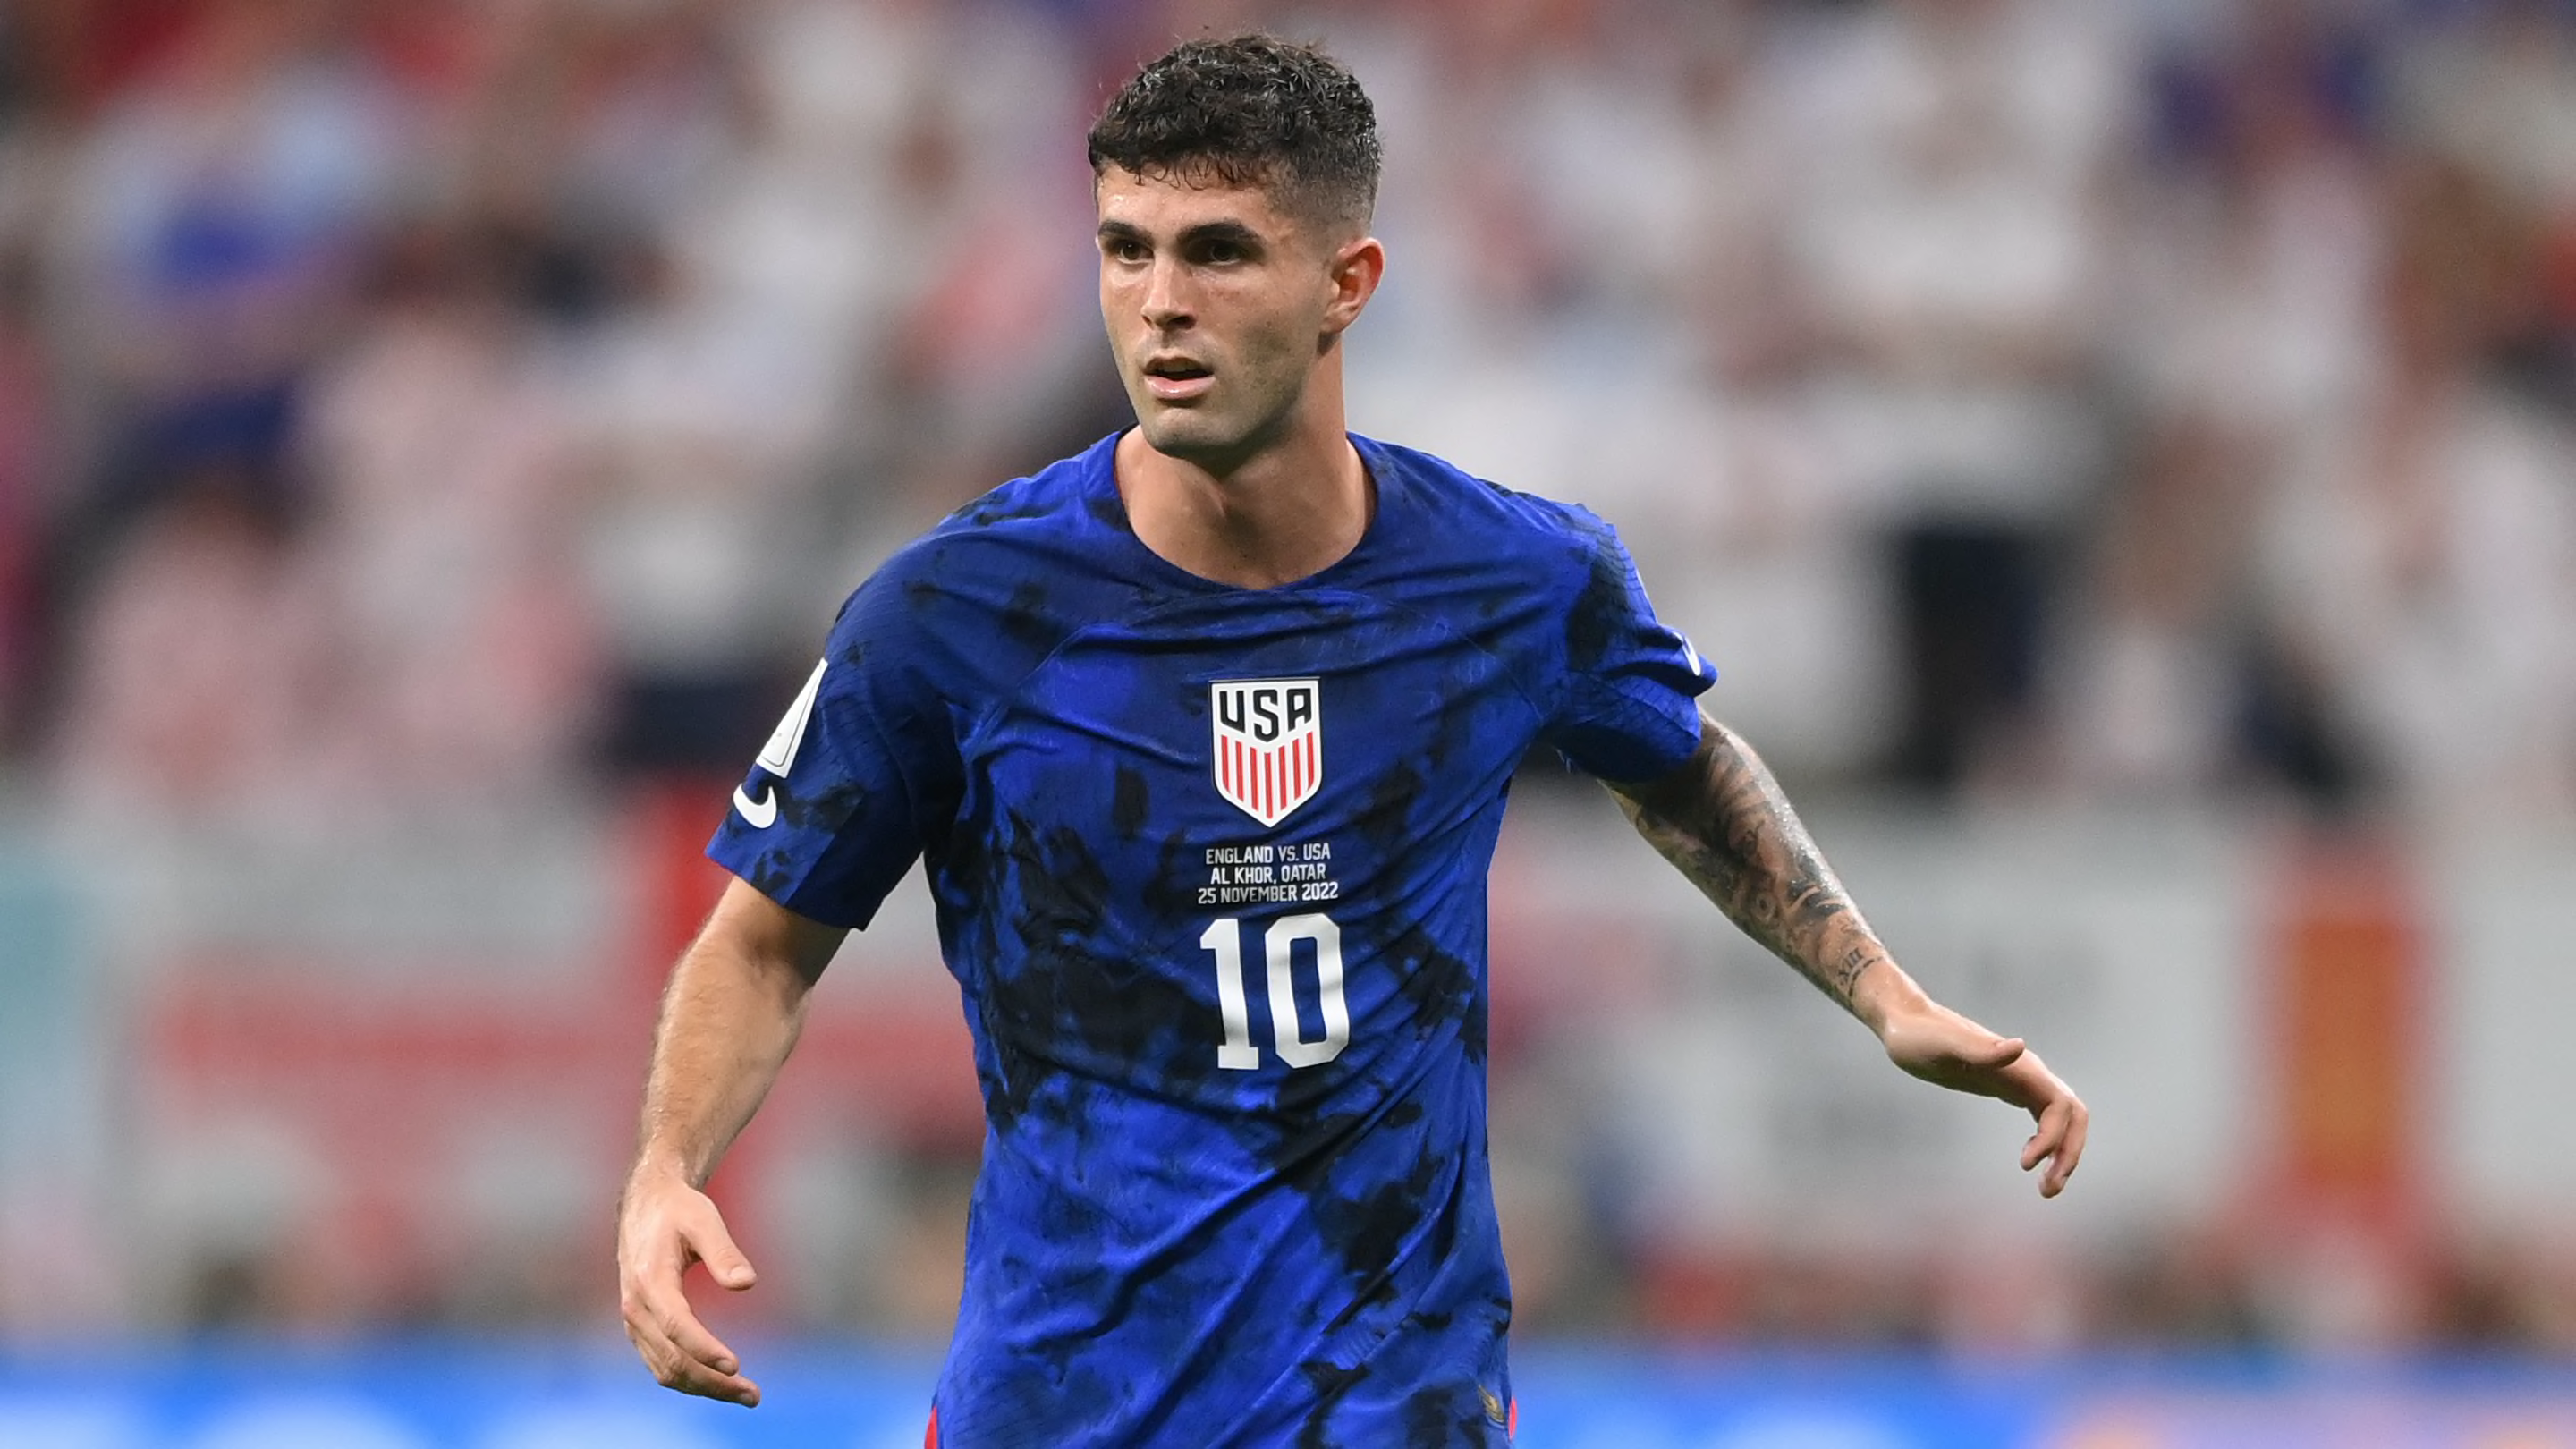 England fans booing Southgate a 'positive sign' for USMNT, says Christian Pulisic